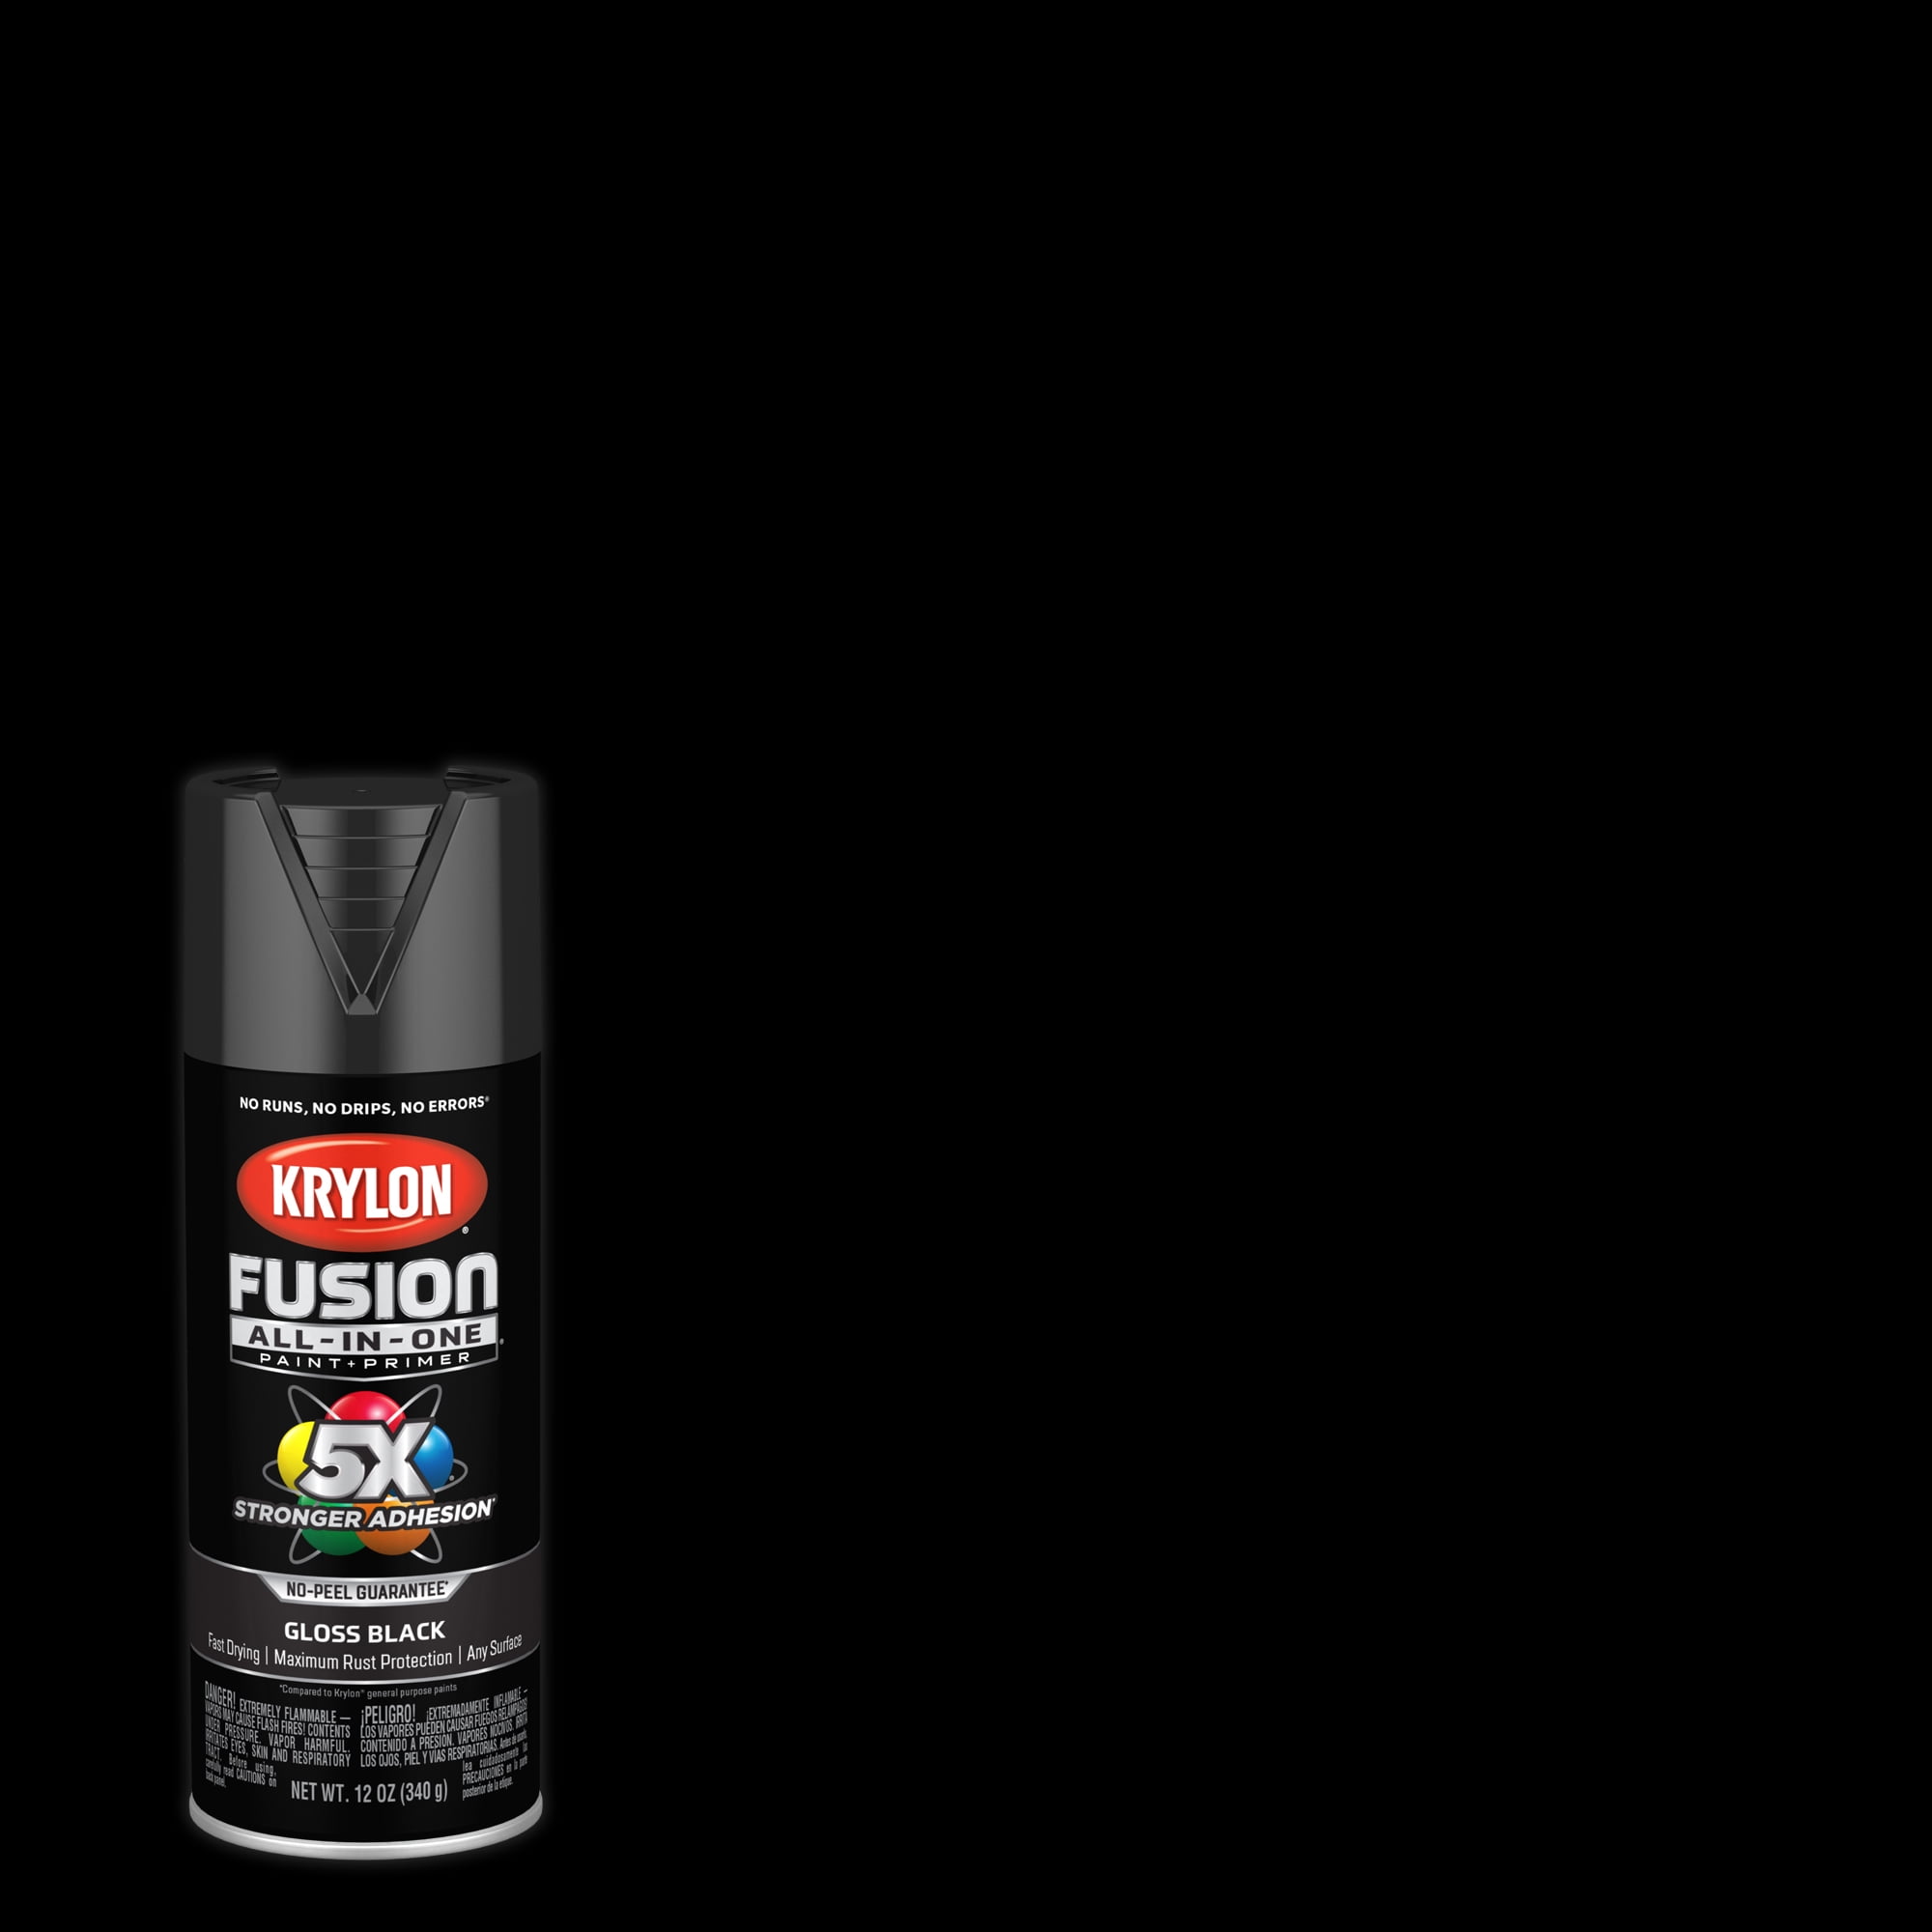 Krylon Fusion All-In-One Gloss Clear Paint+Primer Spray Paint 12